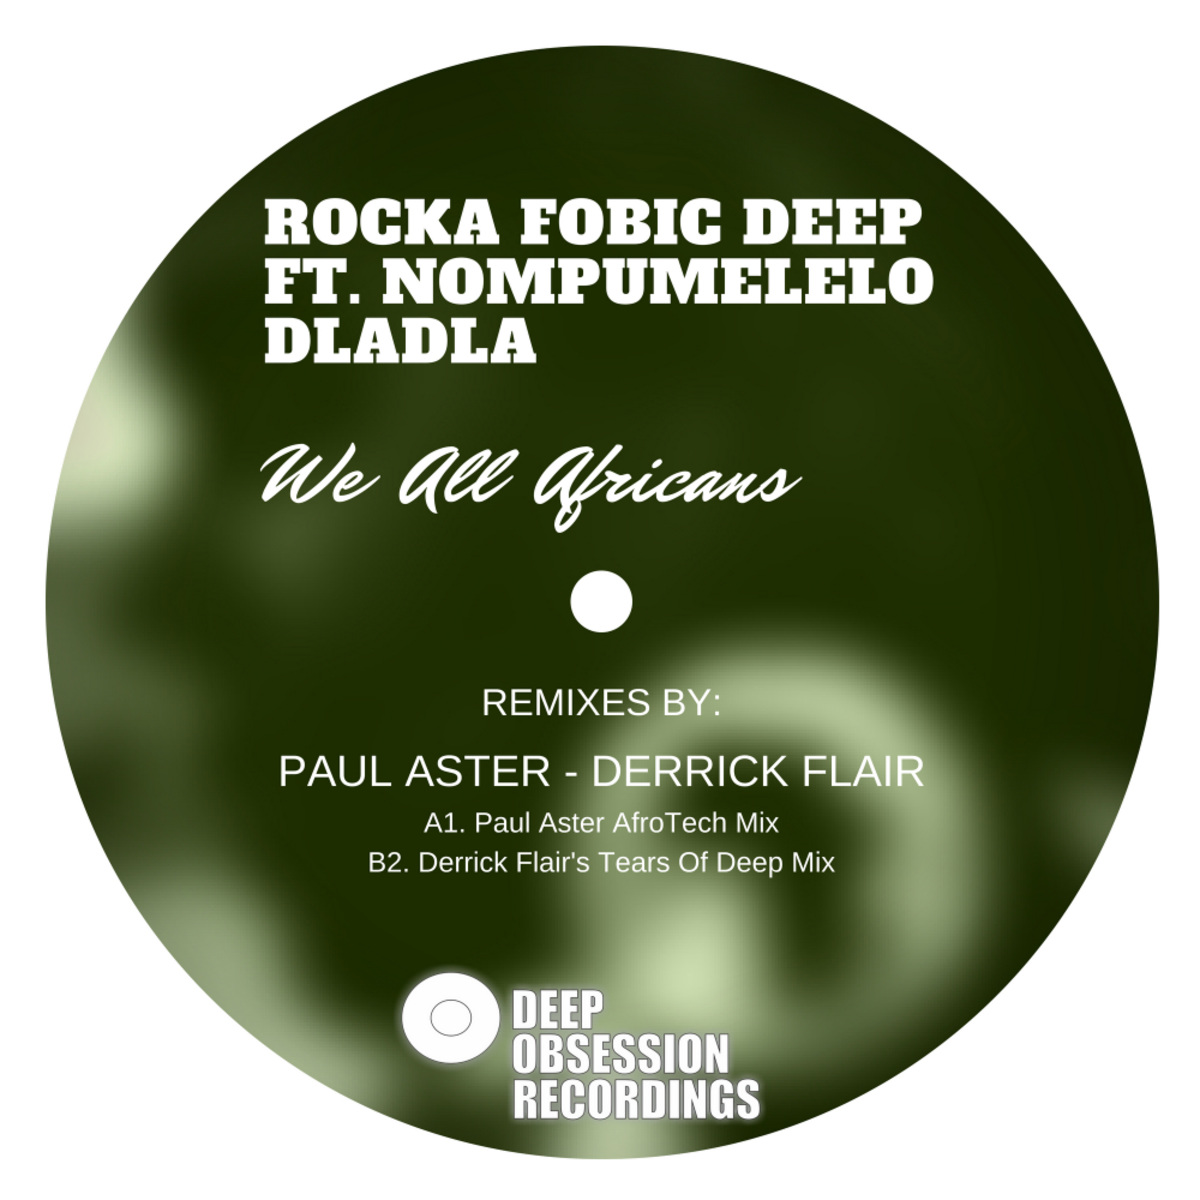 Rocka Fobic Deep feat.Nompumelelo Dladla - We All Africans / Deep Obsession Recordings